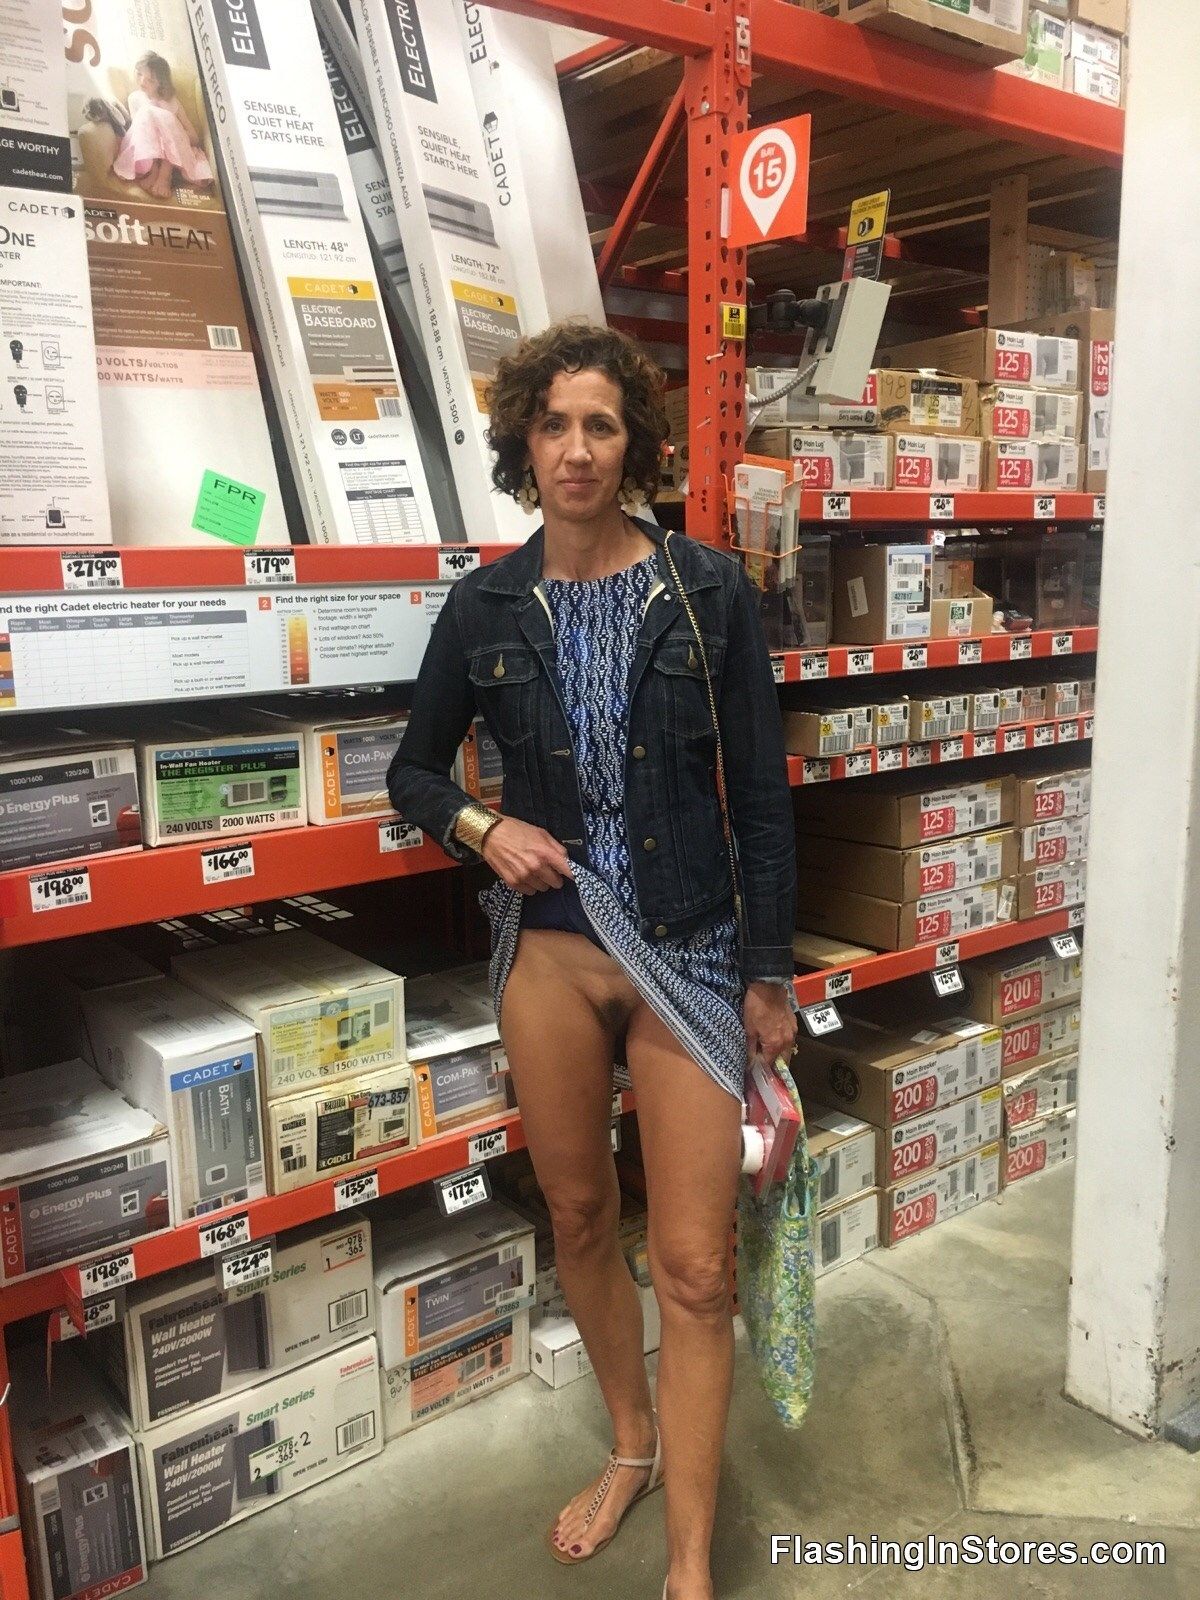 best of Flashing public store pussy wife